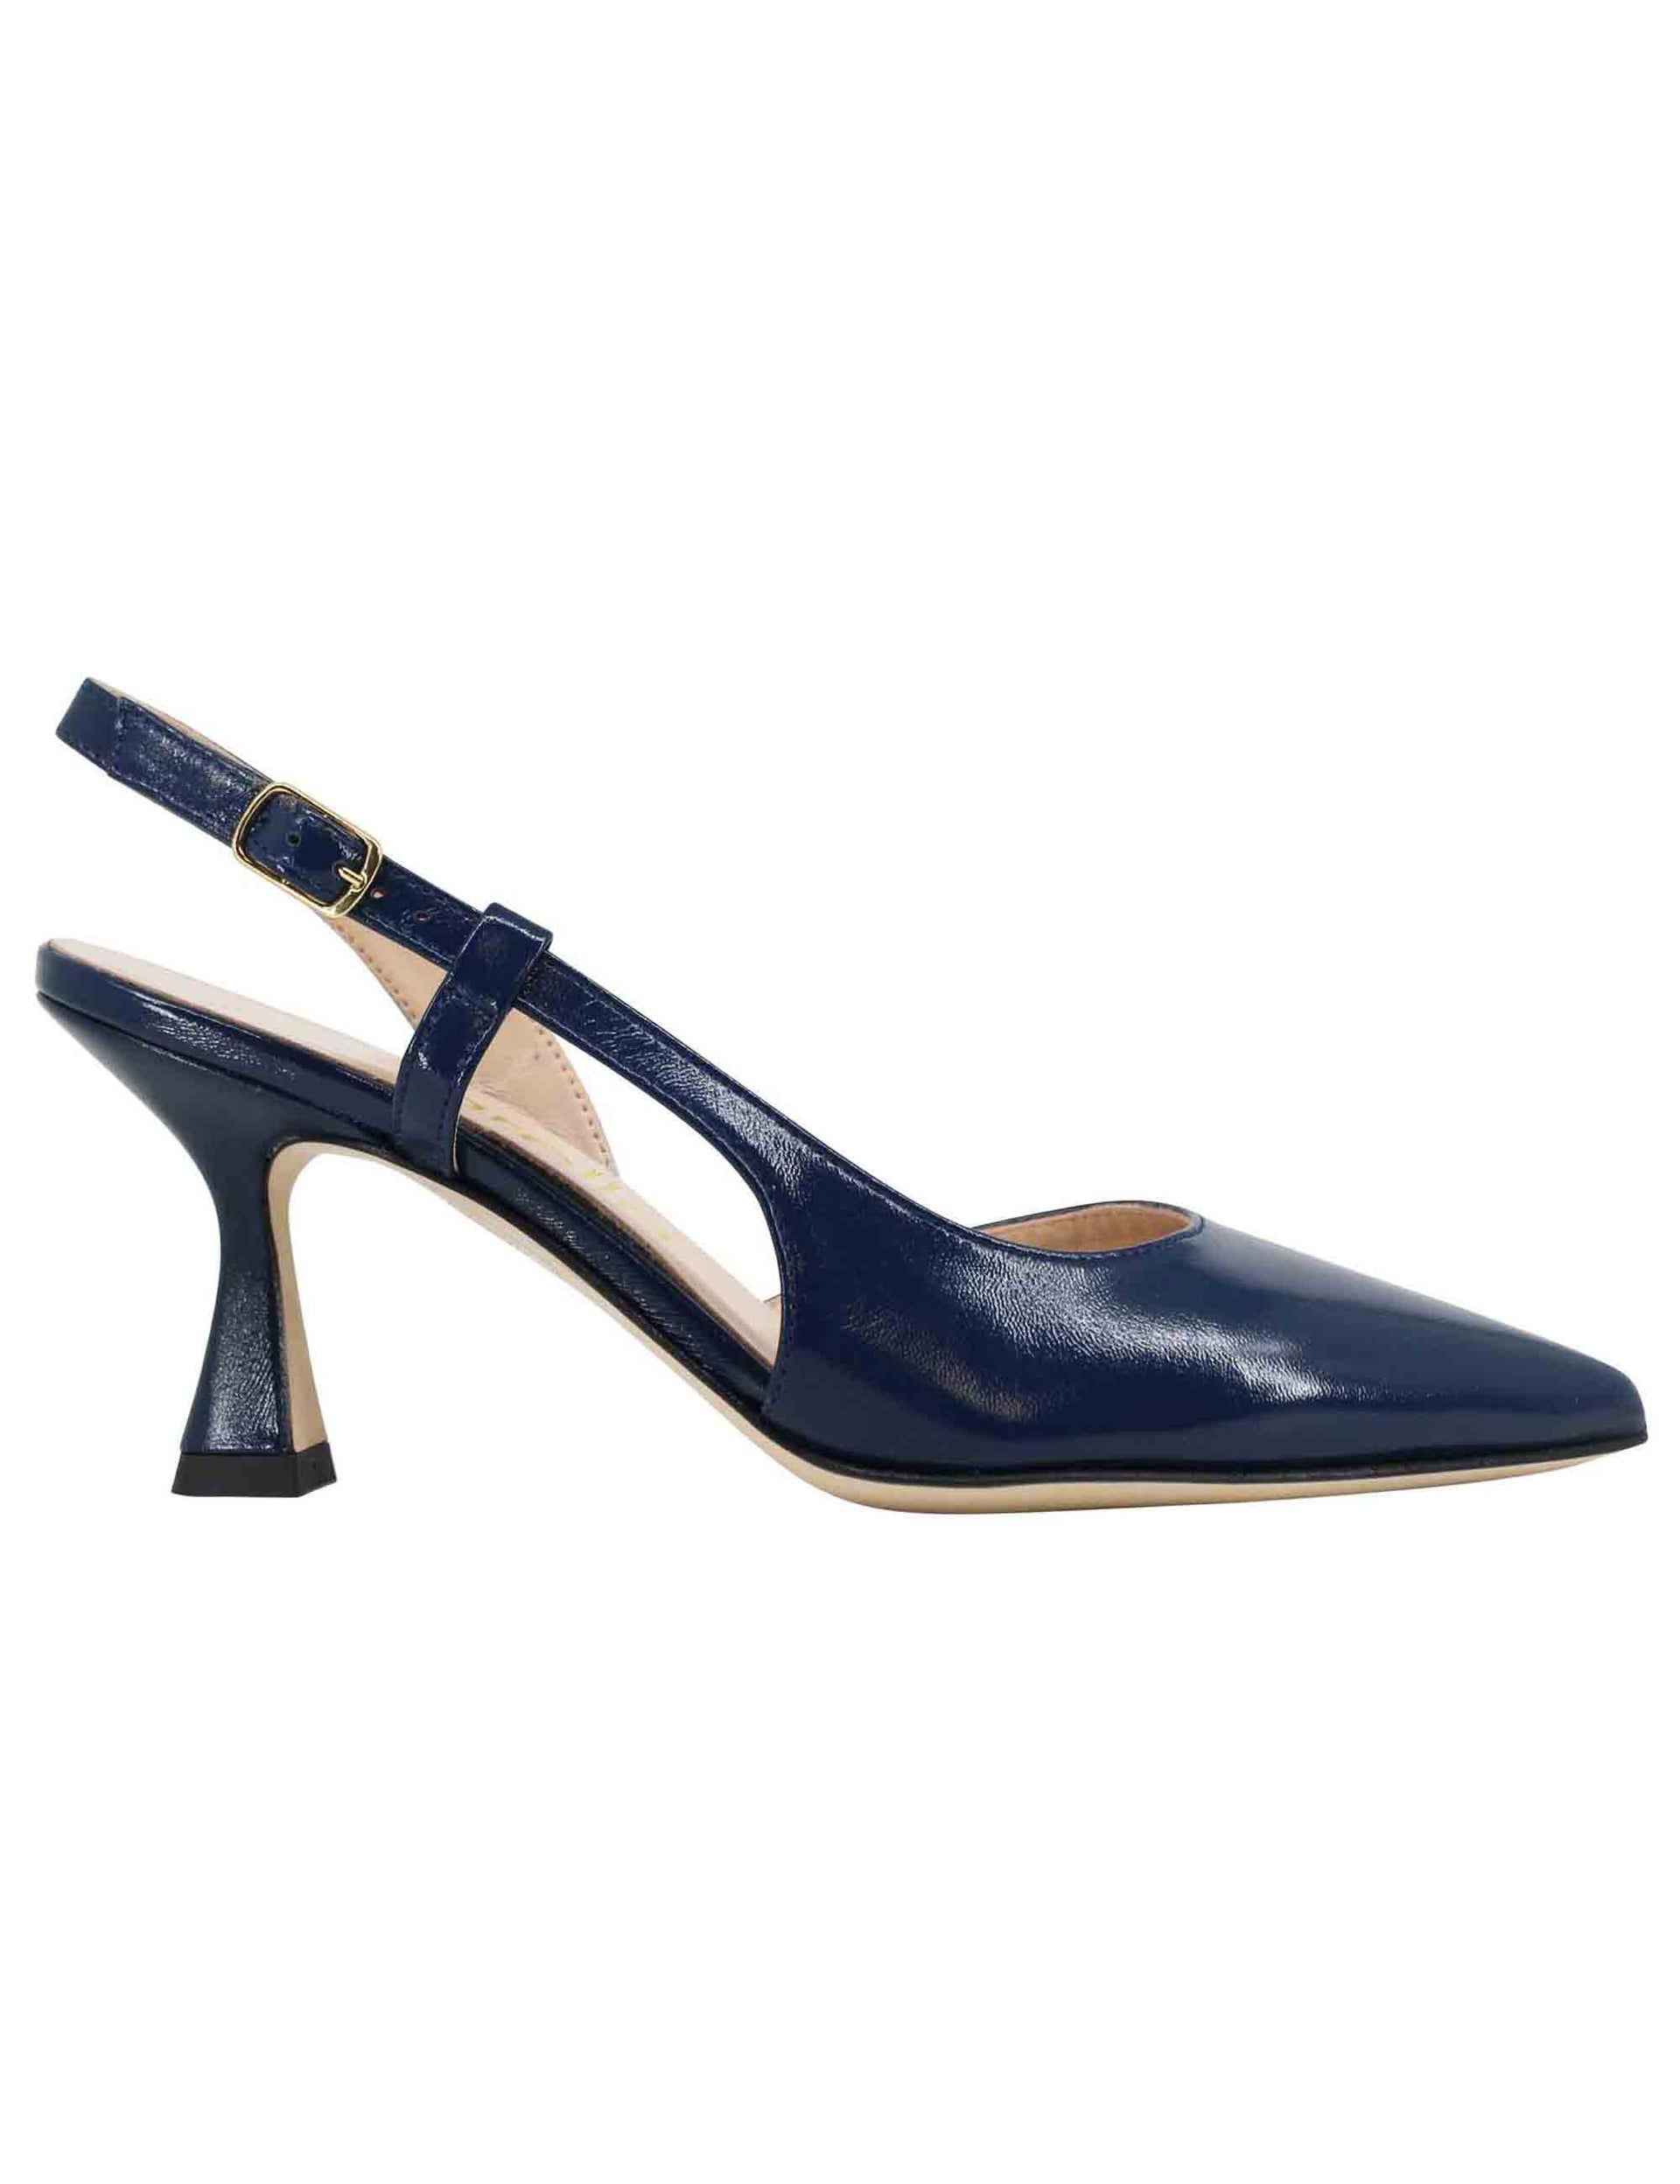 Women's slingback pumps in blue leather with high heel and asymmetric neckline